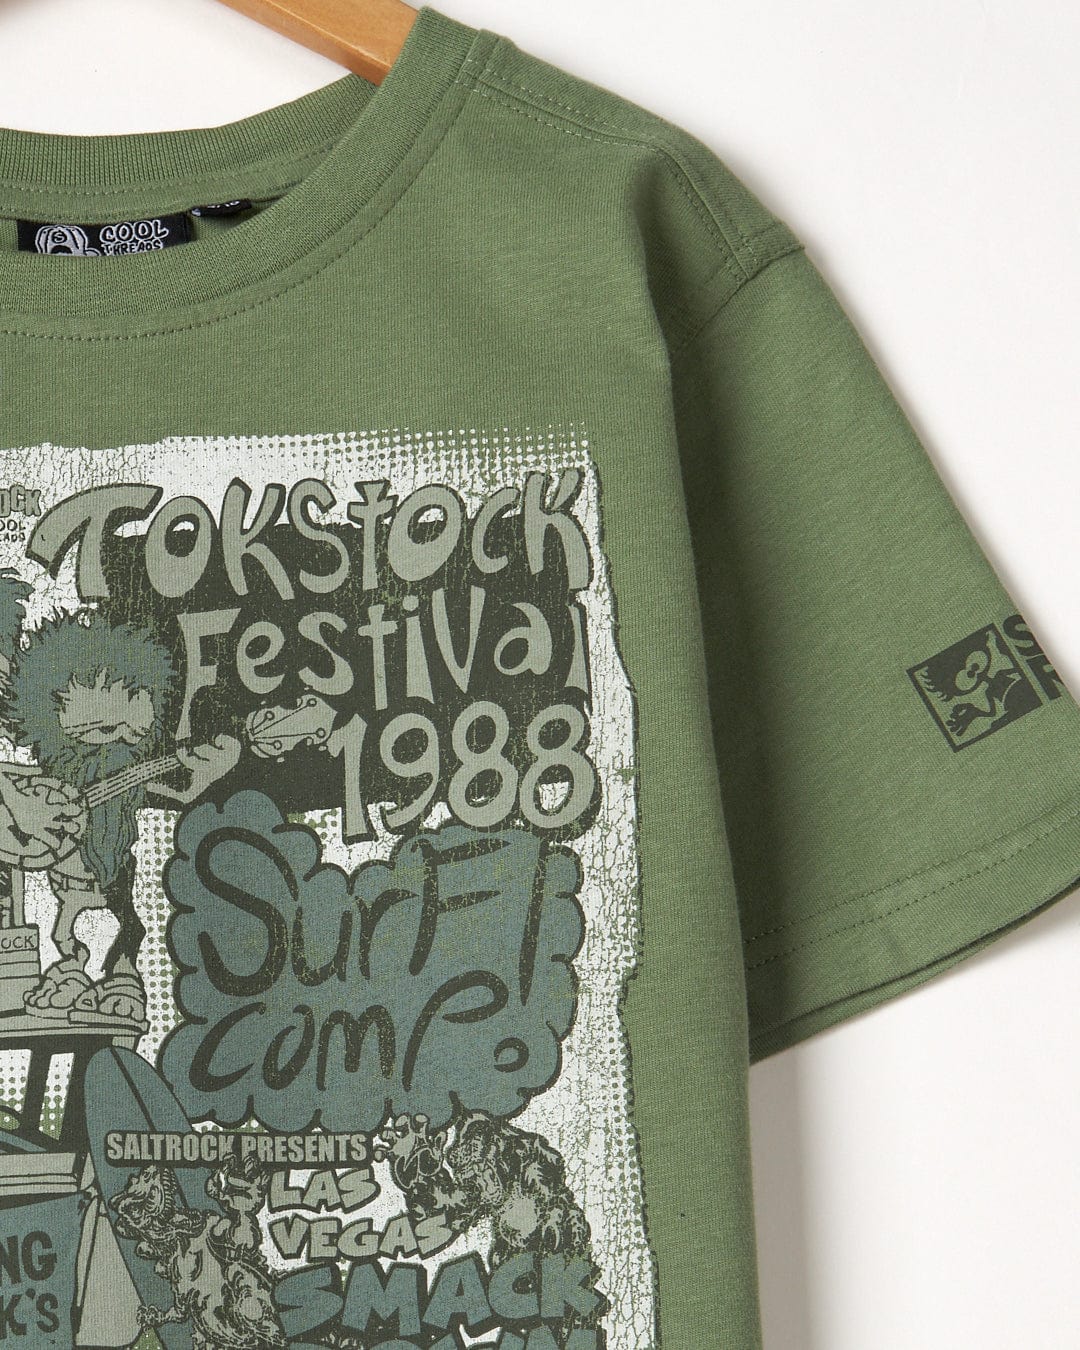 A green cotton t-shirt with the words Saltrock Festival Merch on it.